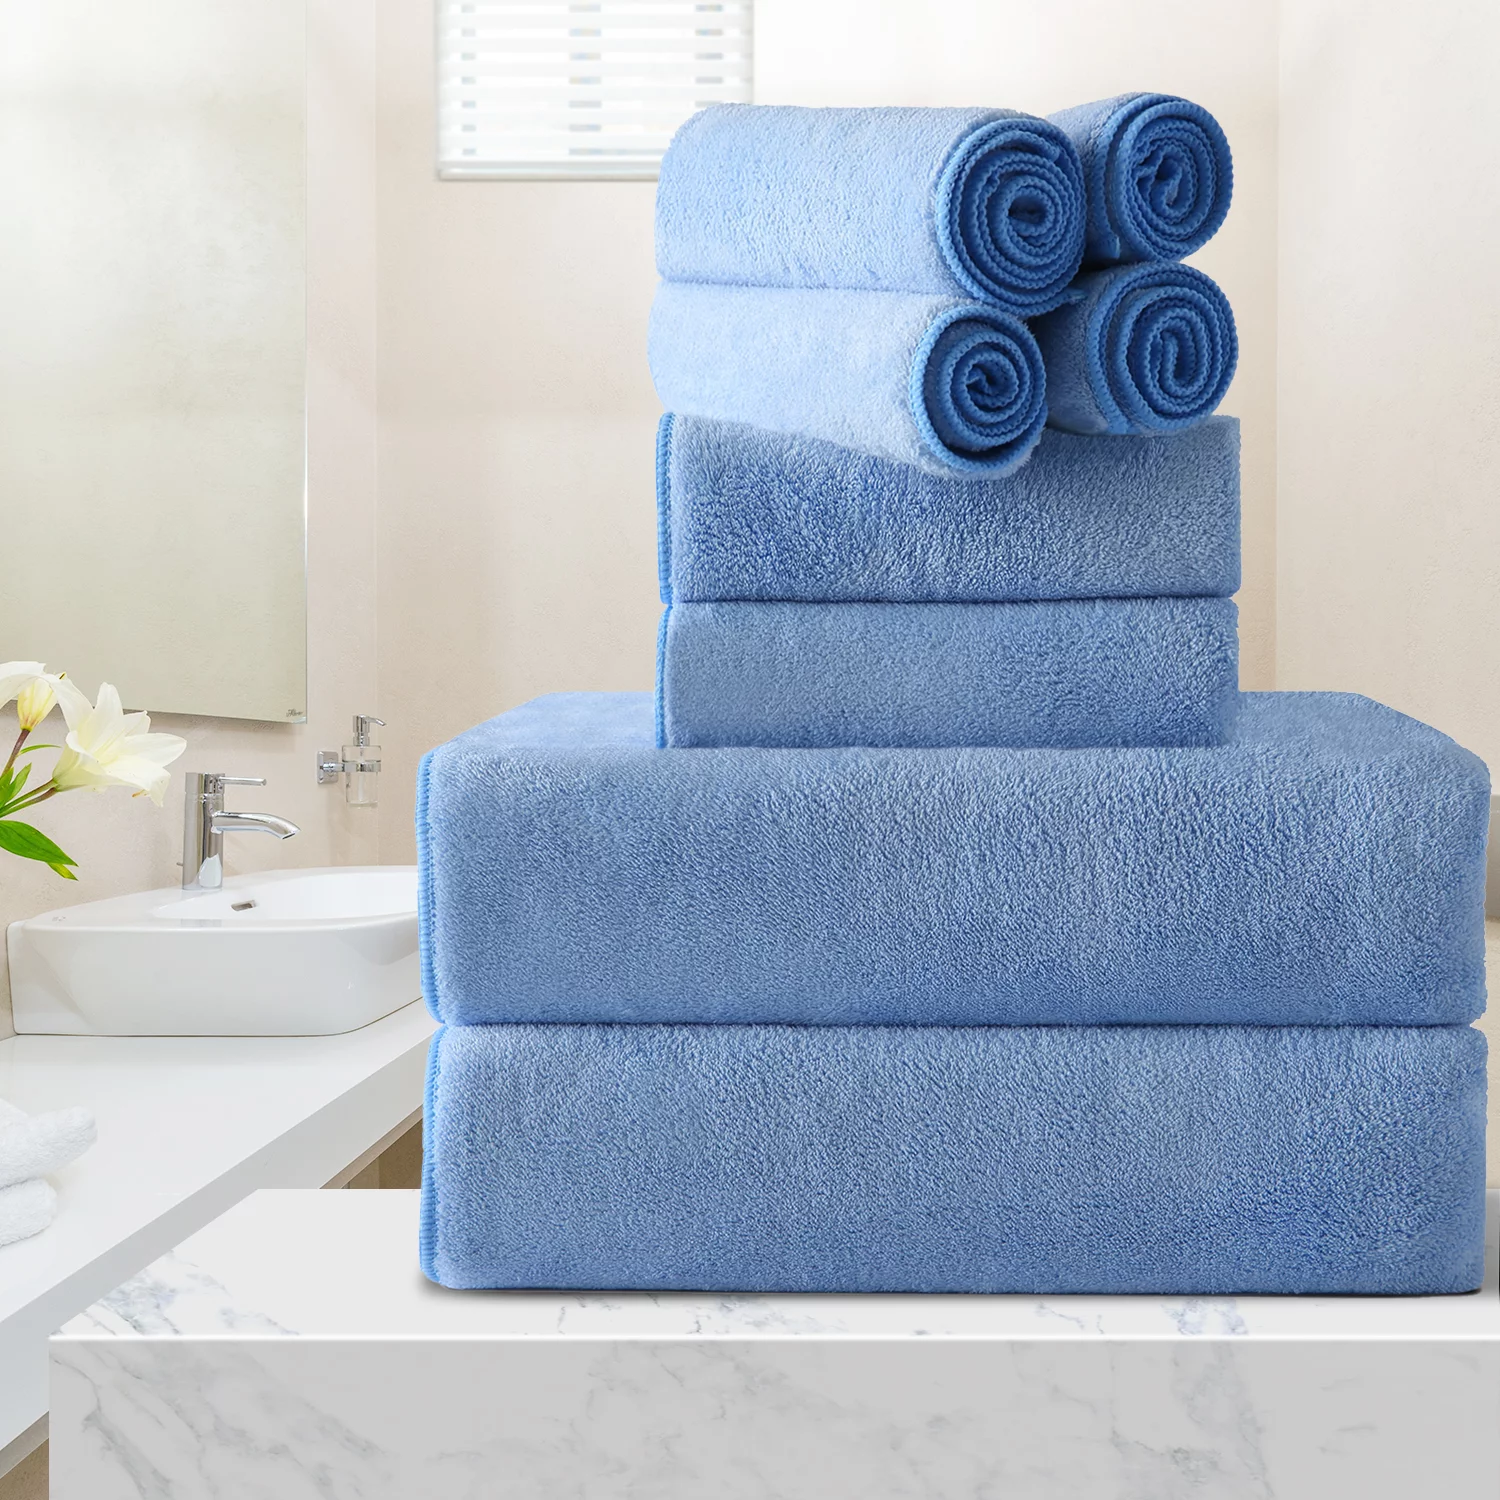 4 Piece Oversized Bath Sheet Towels (35 x 70 in) 700 GSM Ultra Soft Large  Bath Towel Set Thick Cozy Quick Dry Bathroom Towels Hotel Luxurious Towels